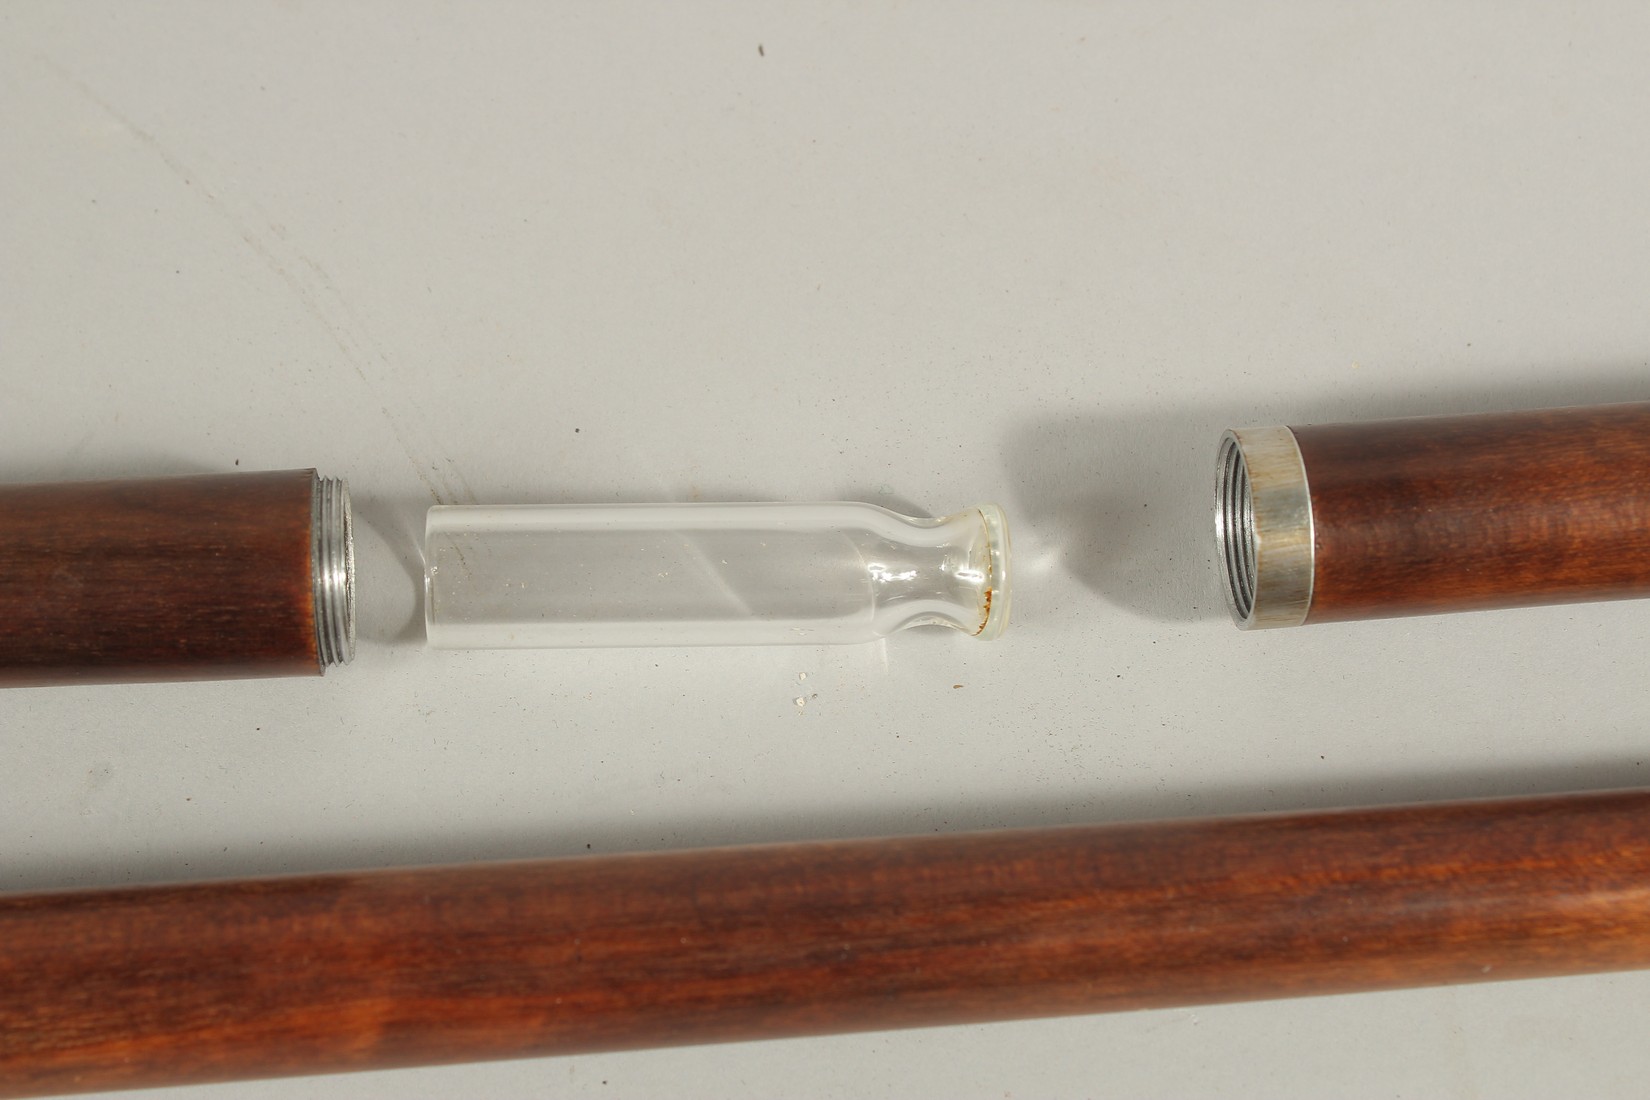 A RARE 19TH CENTURY WALKING STICK with metal top and two screw off sections revealing a long glass - Bild 4 aus 7